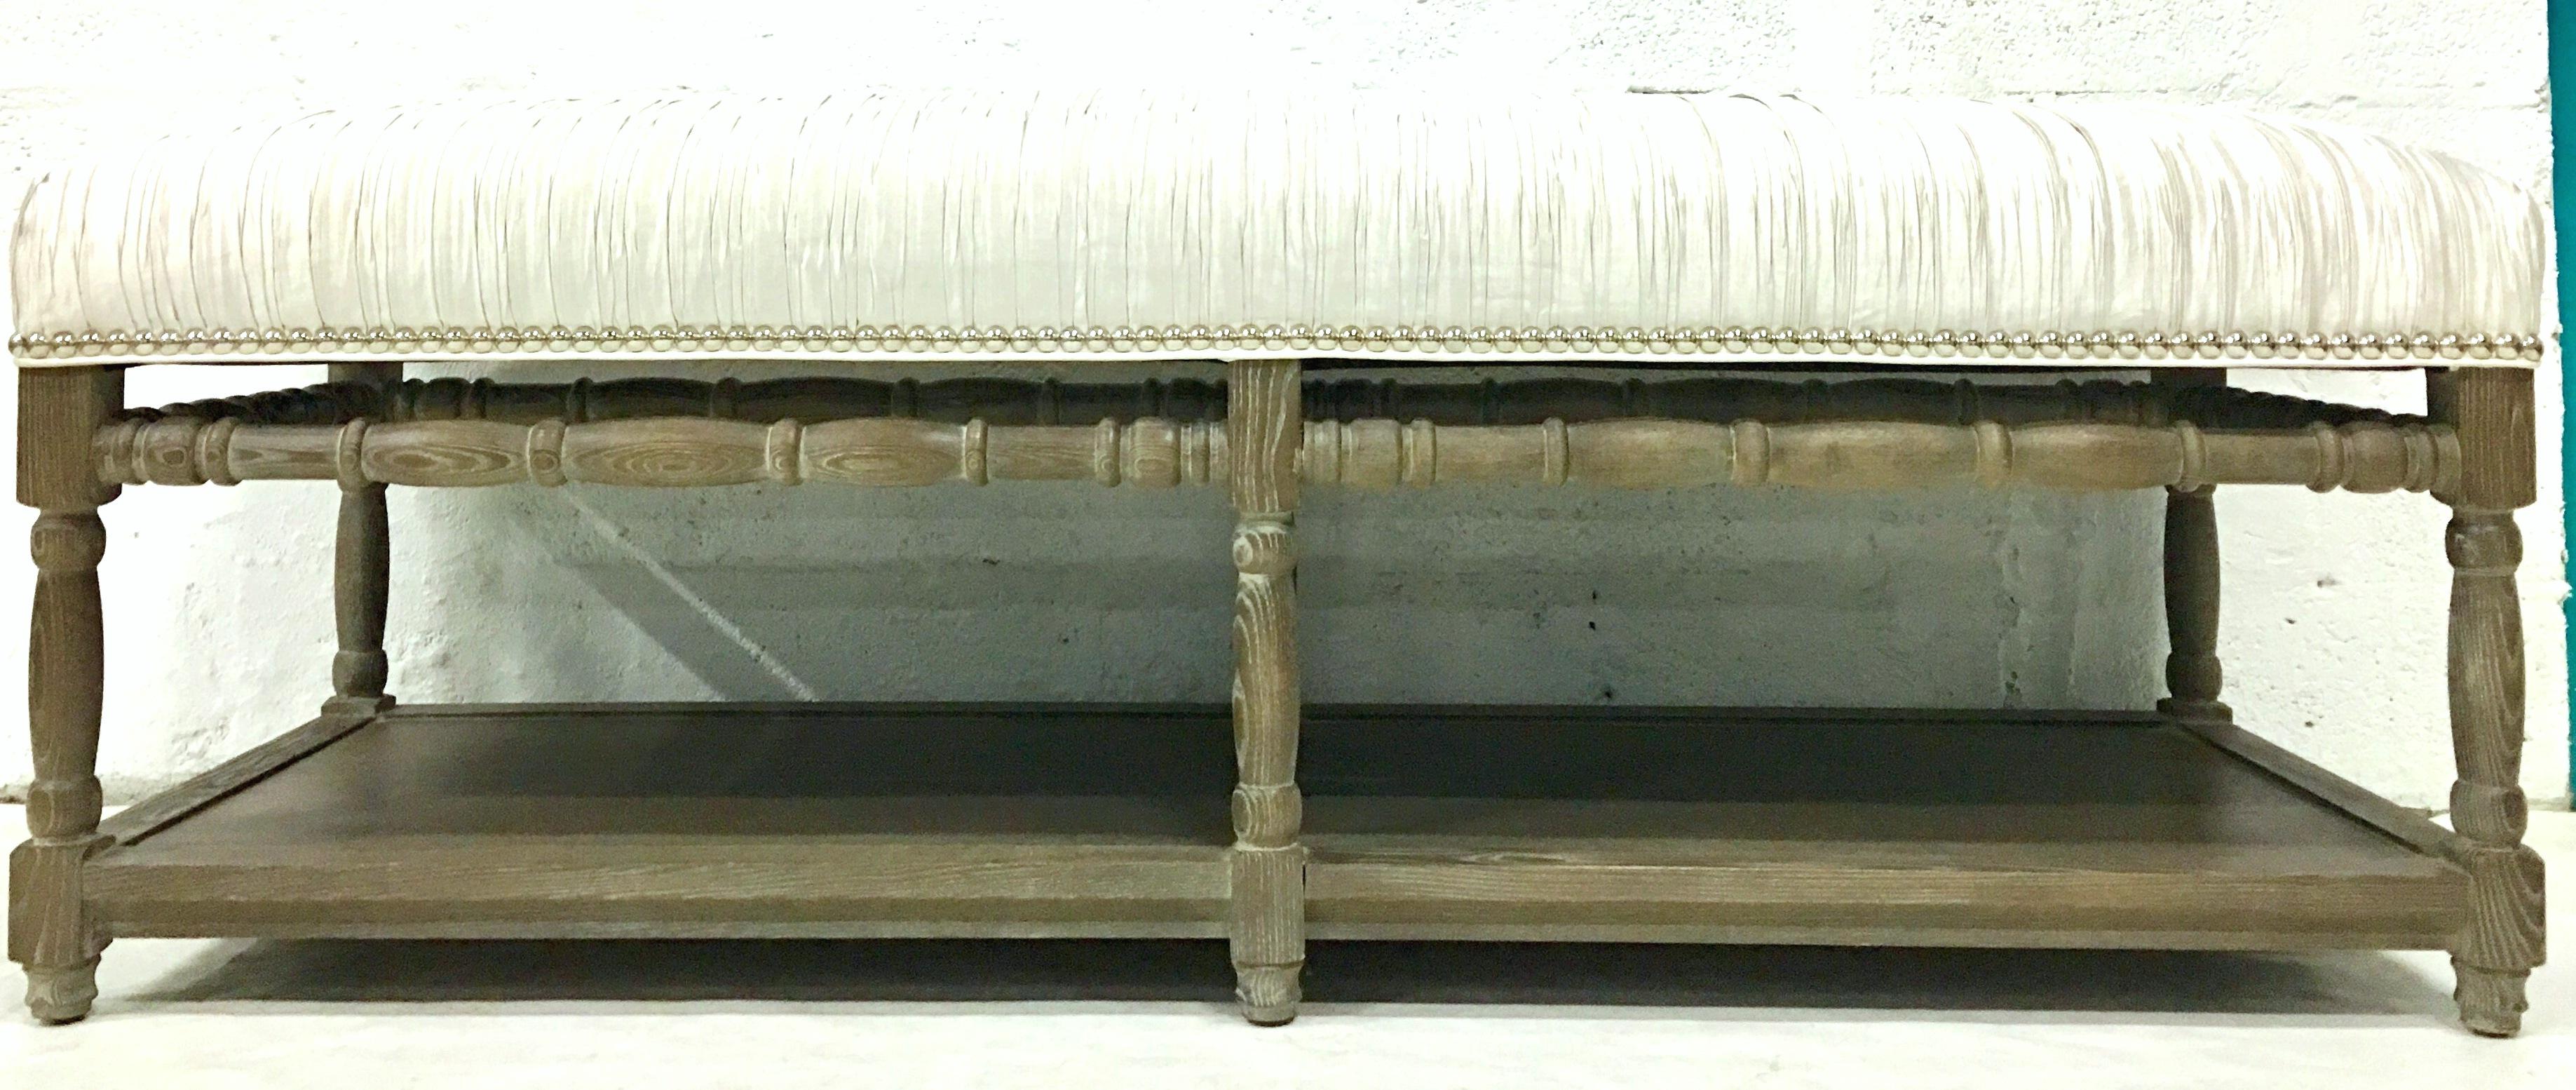 Fabric 21st Century Modern Cerused Wood and Silver Silk Metallic Upholstered Wood Bench For Sale